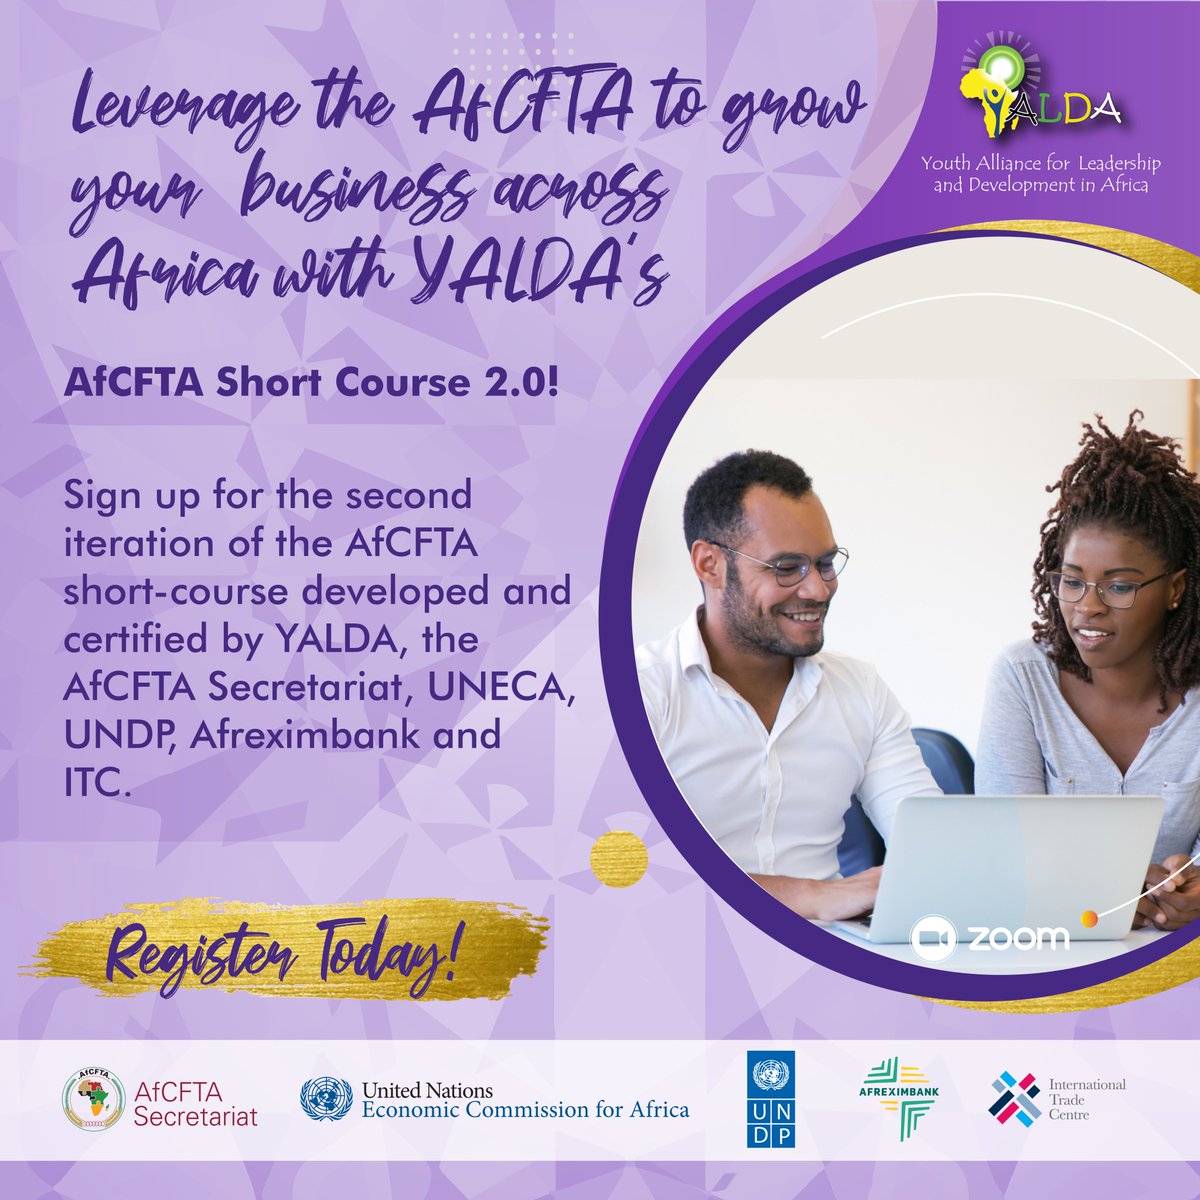 Ignite Your Potential with YALDA's AfCFTA📚 Short Course 2.0!
organized by YALDA & @ECA_OFFICIAL, @UNDPAfrica, @afreximbank, @ITCnews, @ITC_Youth.

Do you want to leverage the #AfCFTA to grow your business across Africa? 

📜Certificate upon completion
✍tinyurl.com/2p9u5hju